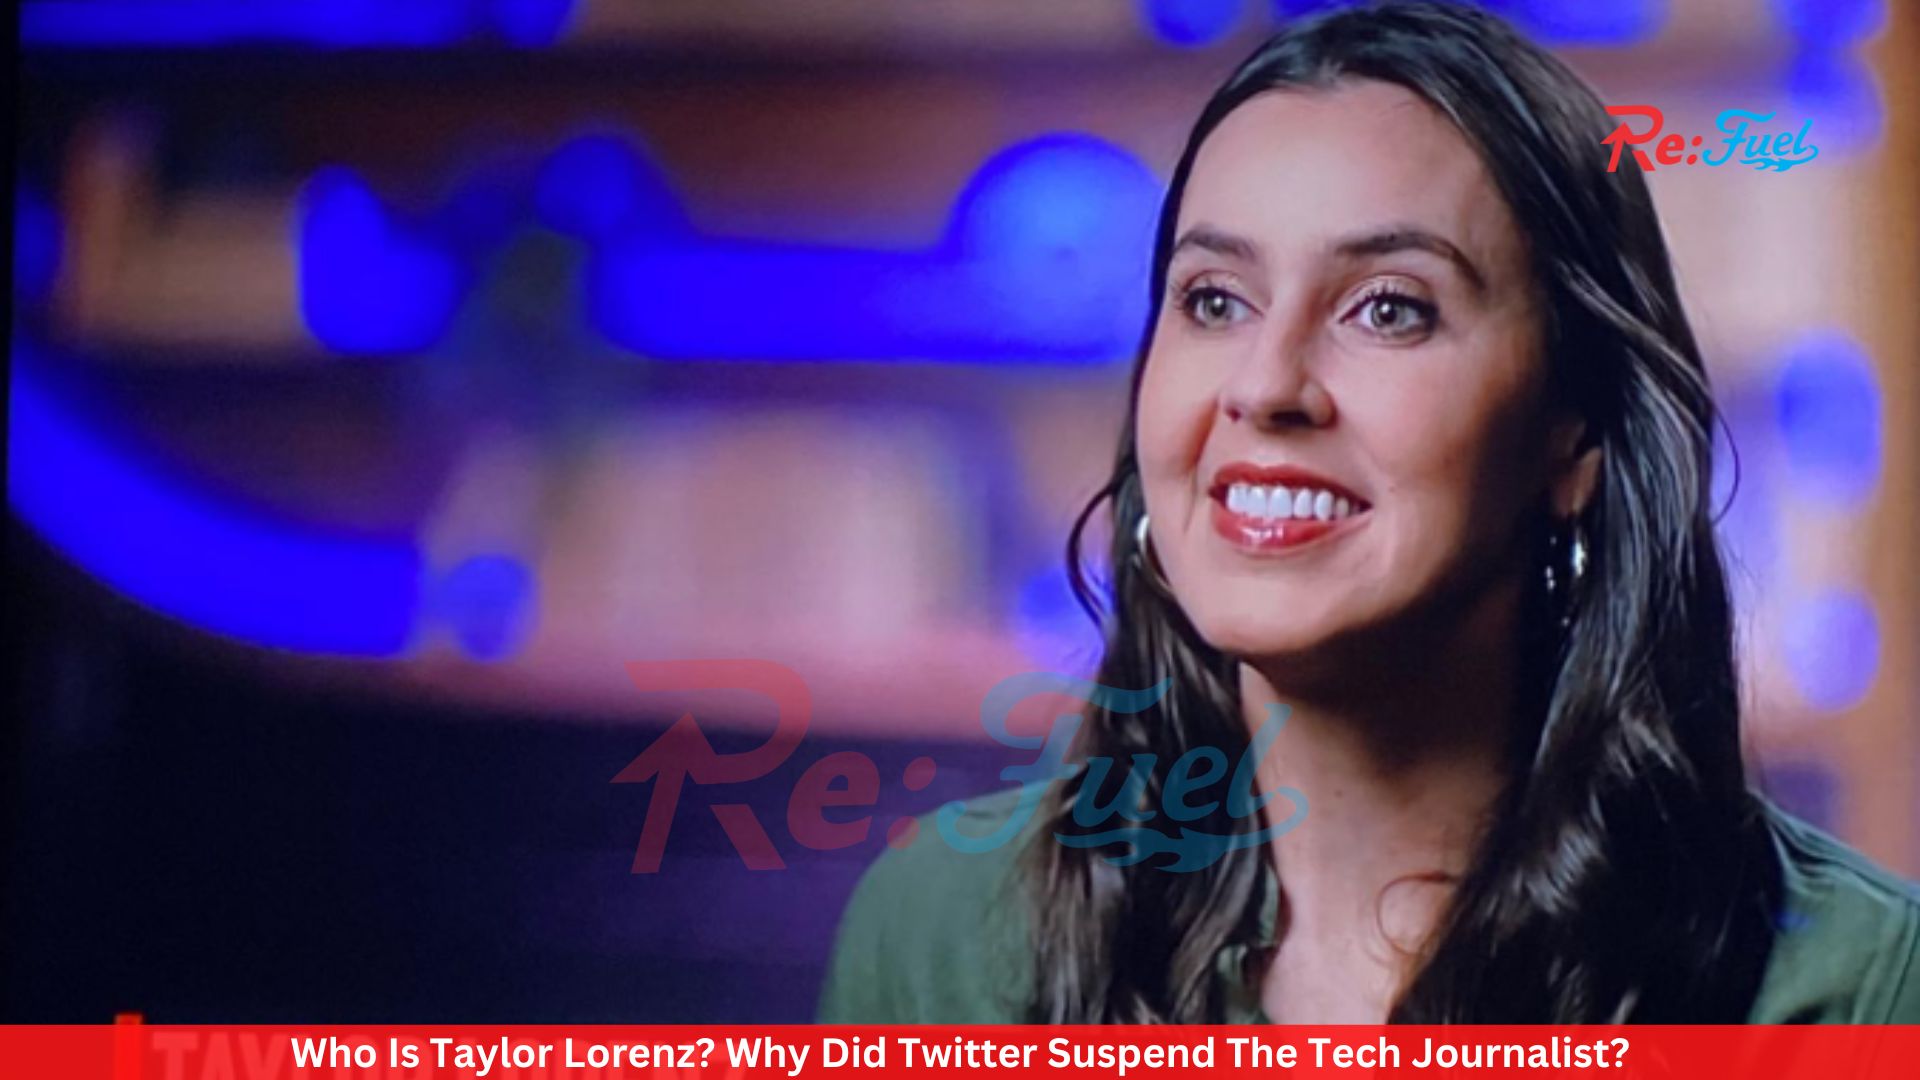 Who Is Taylor Lorenz? Why Did Twitter Suspend The Tech Journalist?